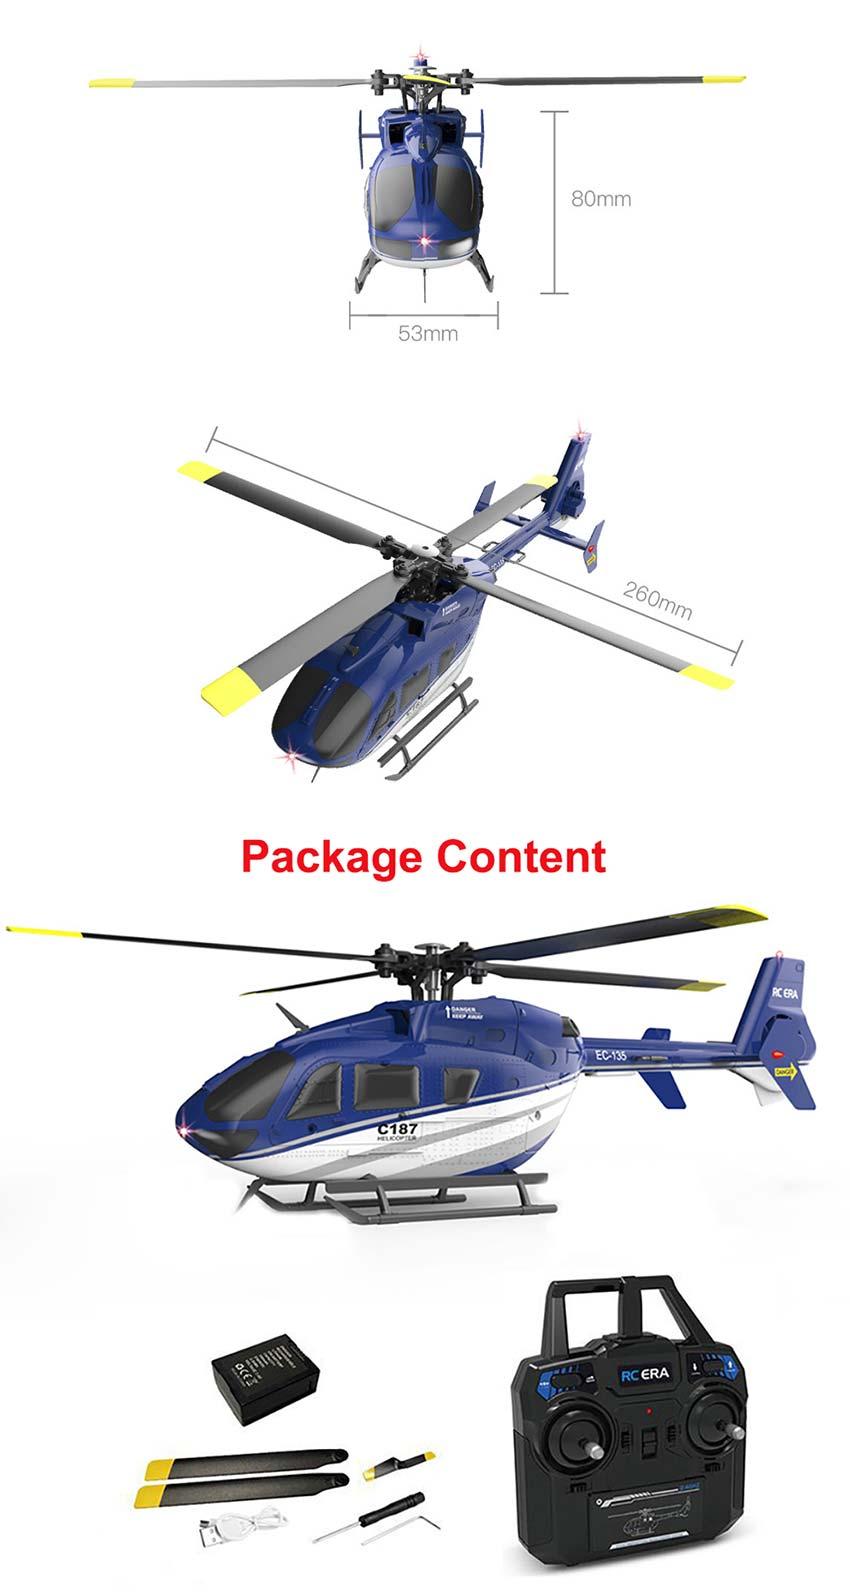 C187 Rc Helicopter: Exceptional Specs of the c187 RC Helicopter